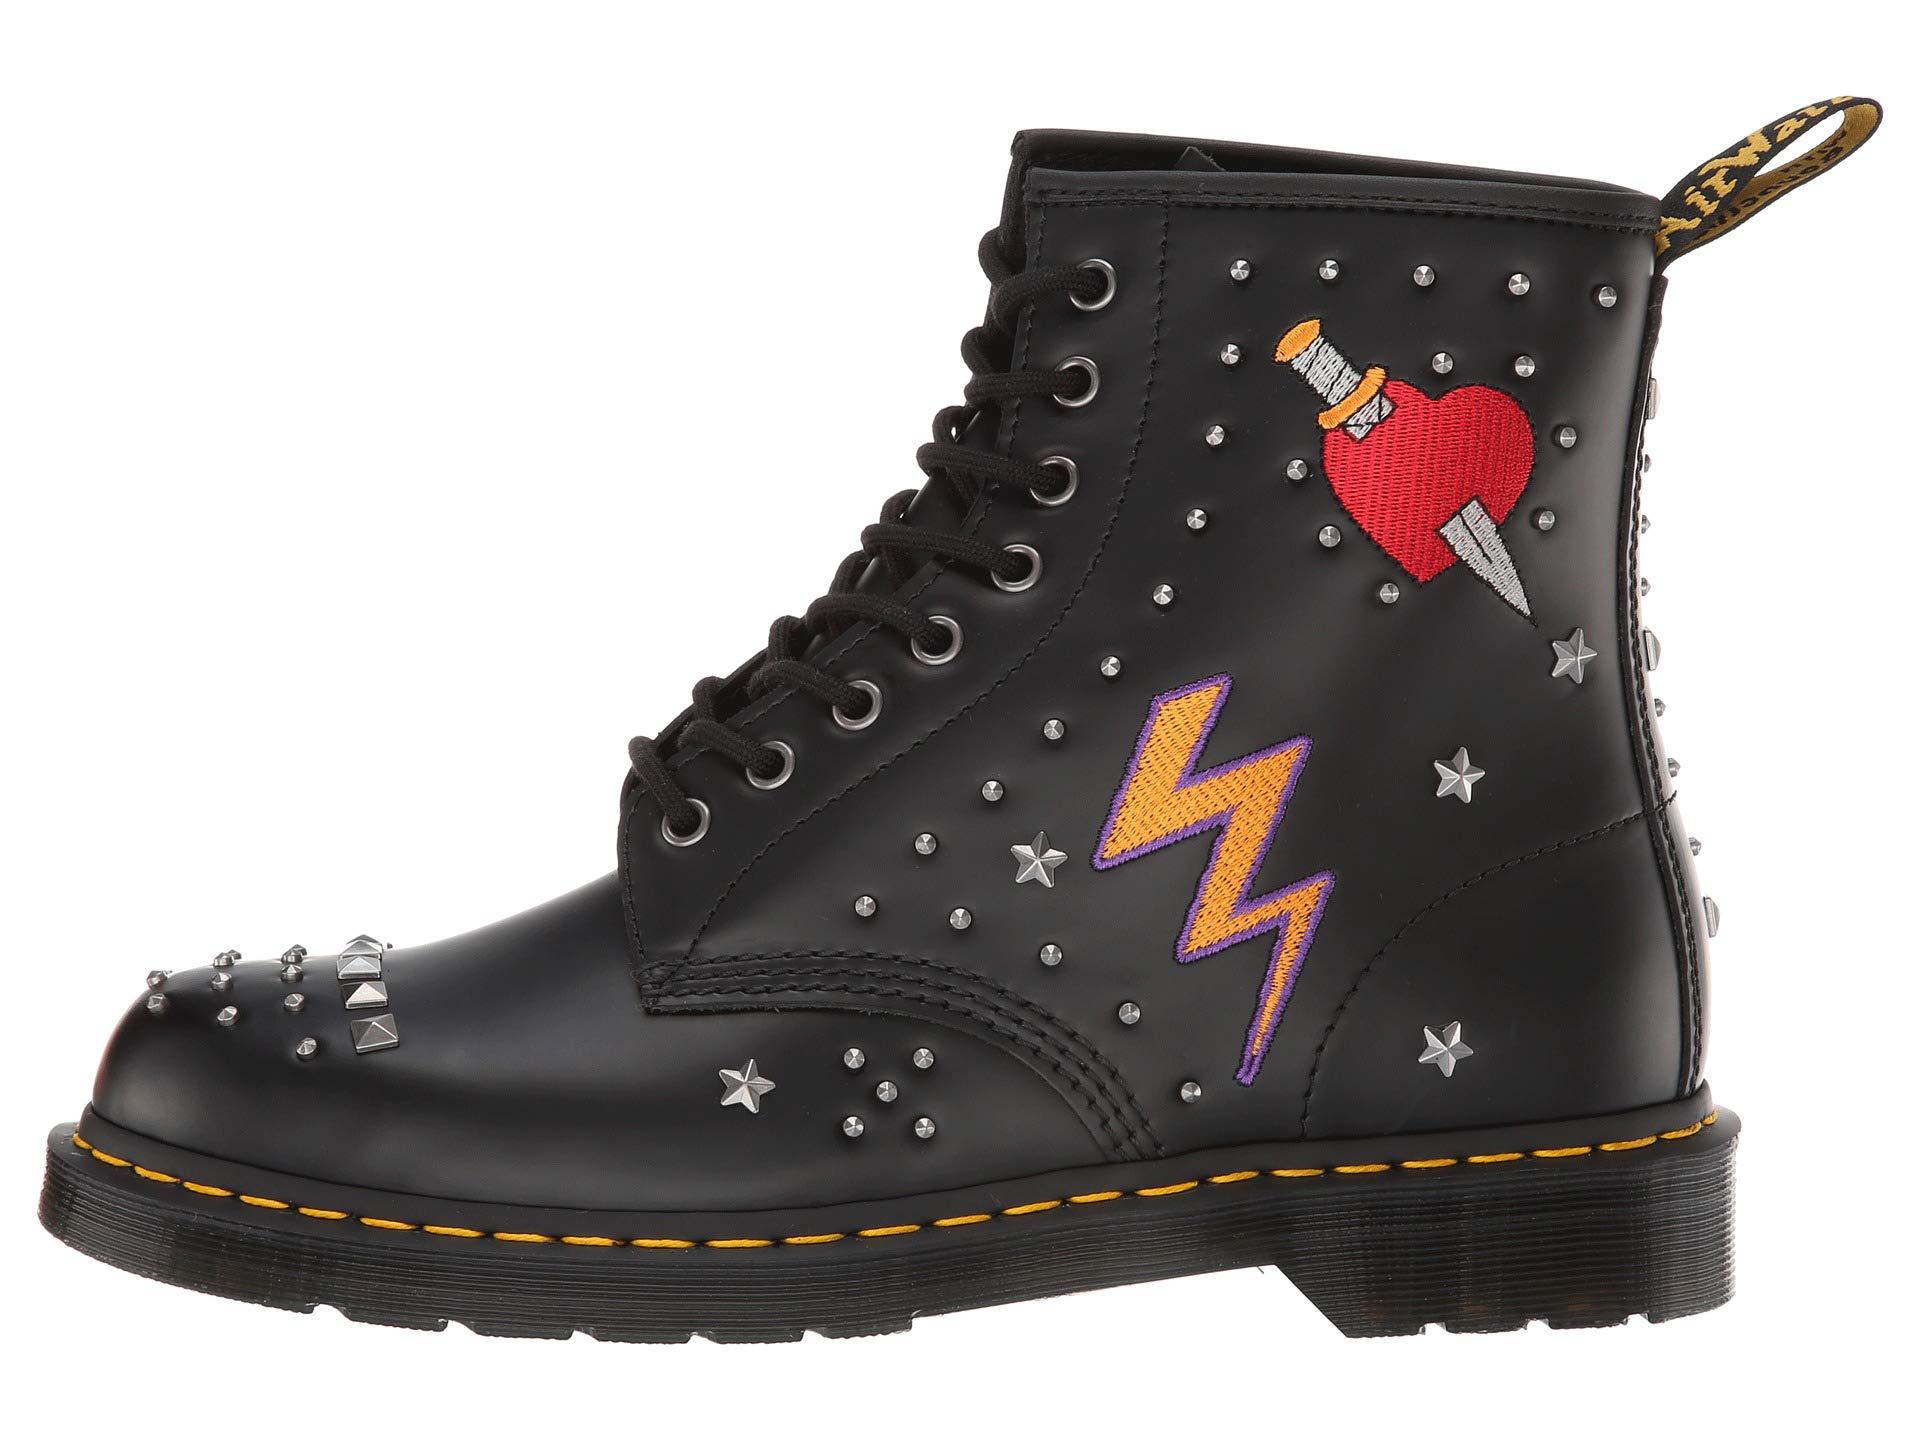 Dr. Martens 1460 Rock Roll (black Smooth) Boots | Lyst